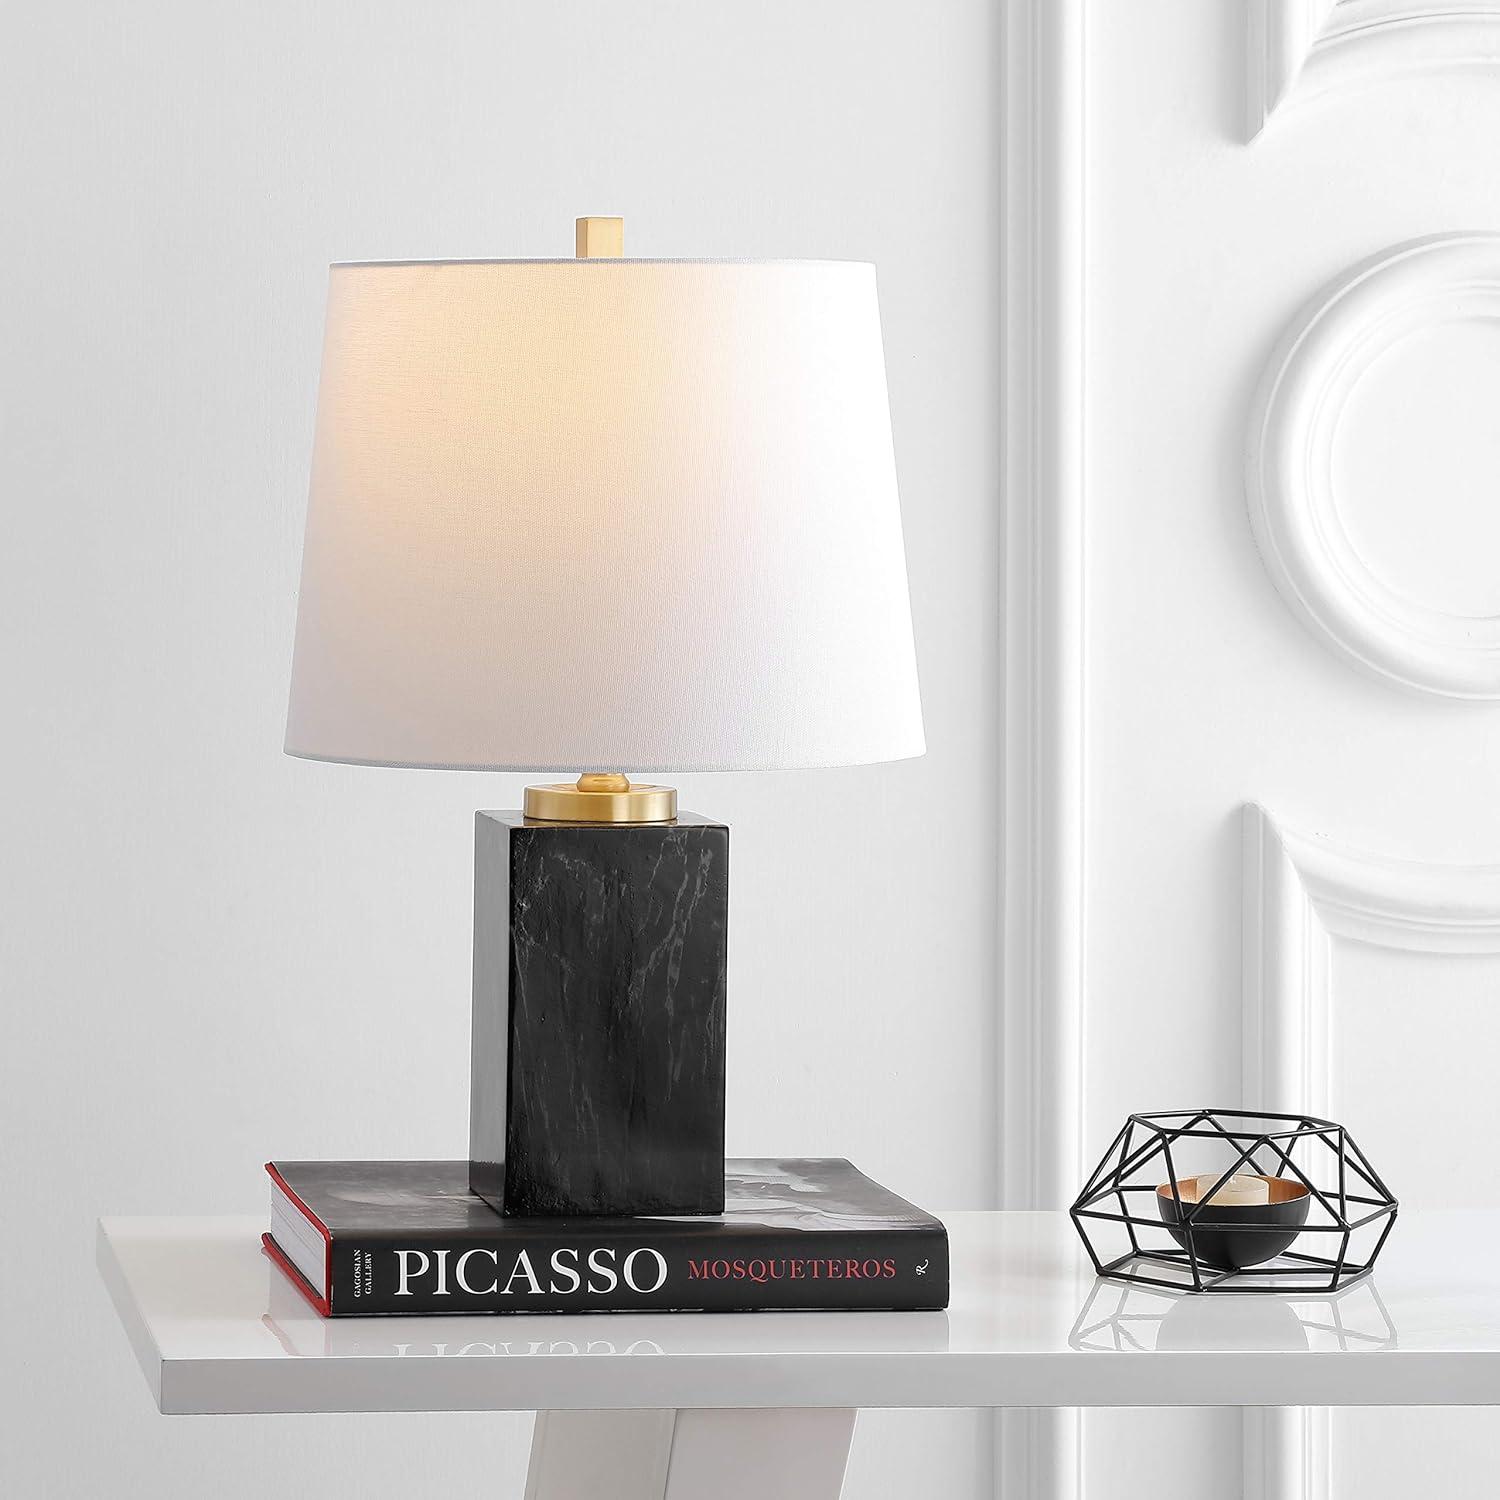 Elegant Black Marble 20.5" Traditional Table Lamp with Brass Accents